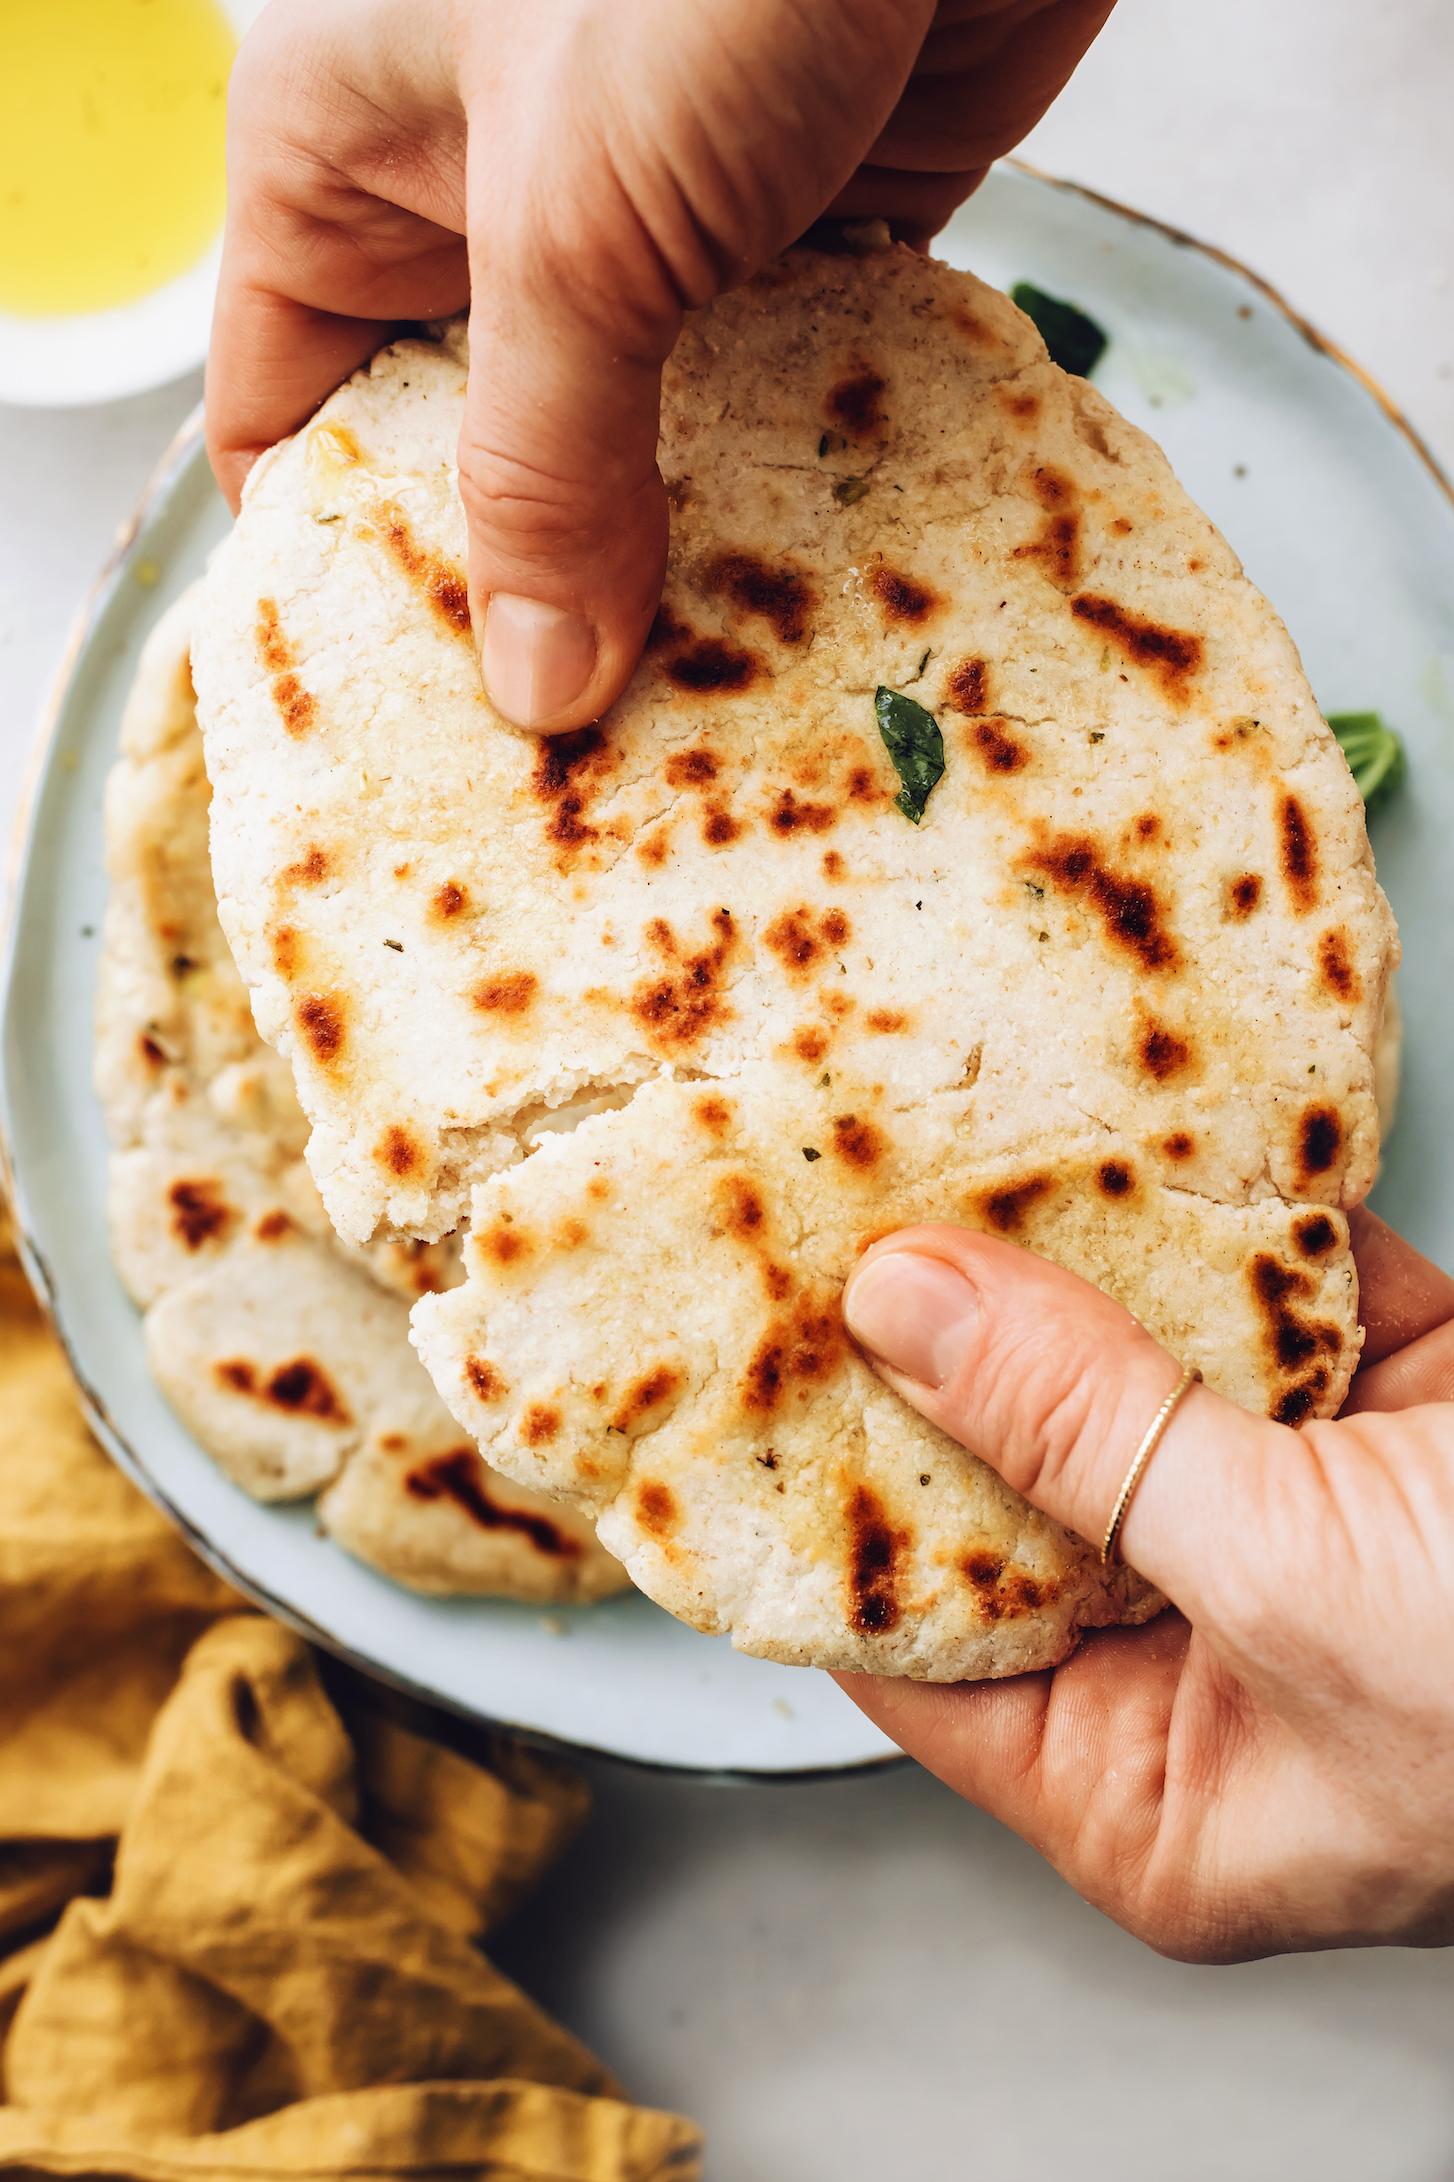  Who needs gluten when you can whip up these scrumptious gluten-free flatbread wraps in no time?